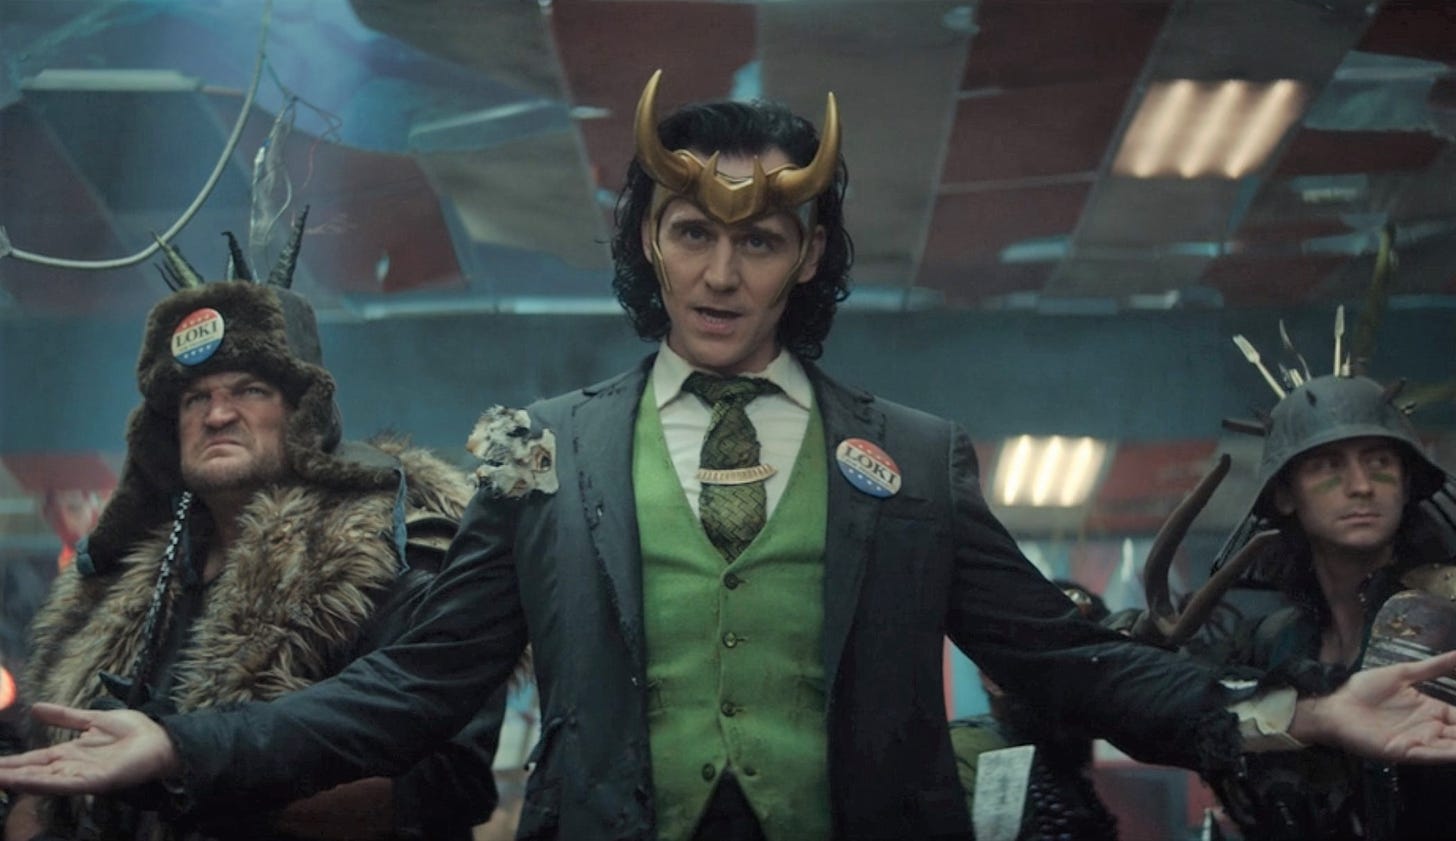 President Loki stands with arms open.